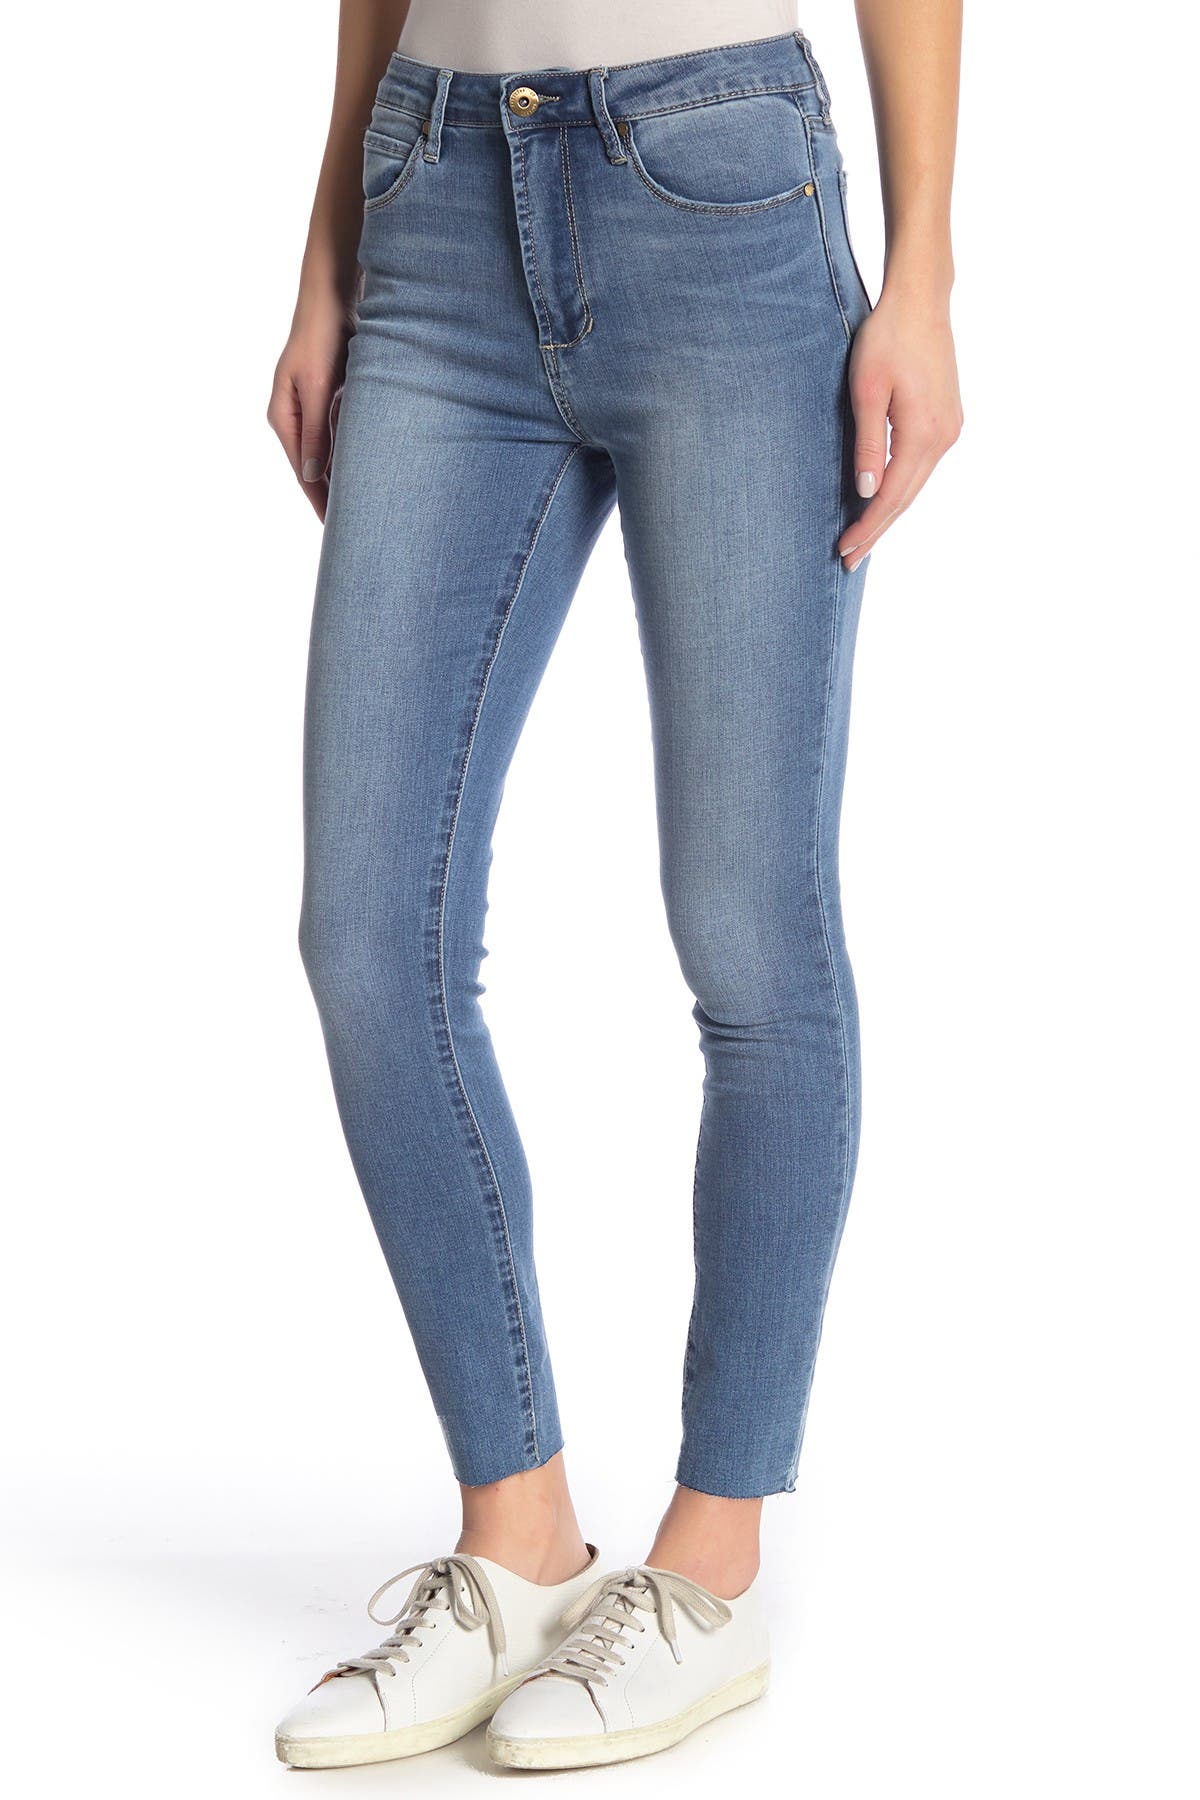 articles of society high rise jeans